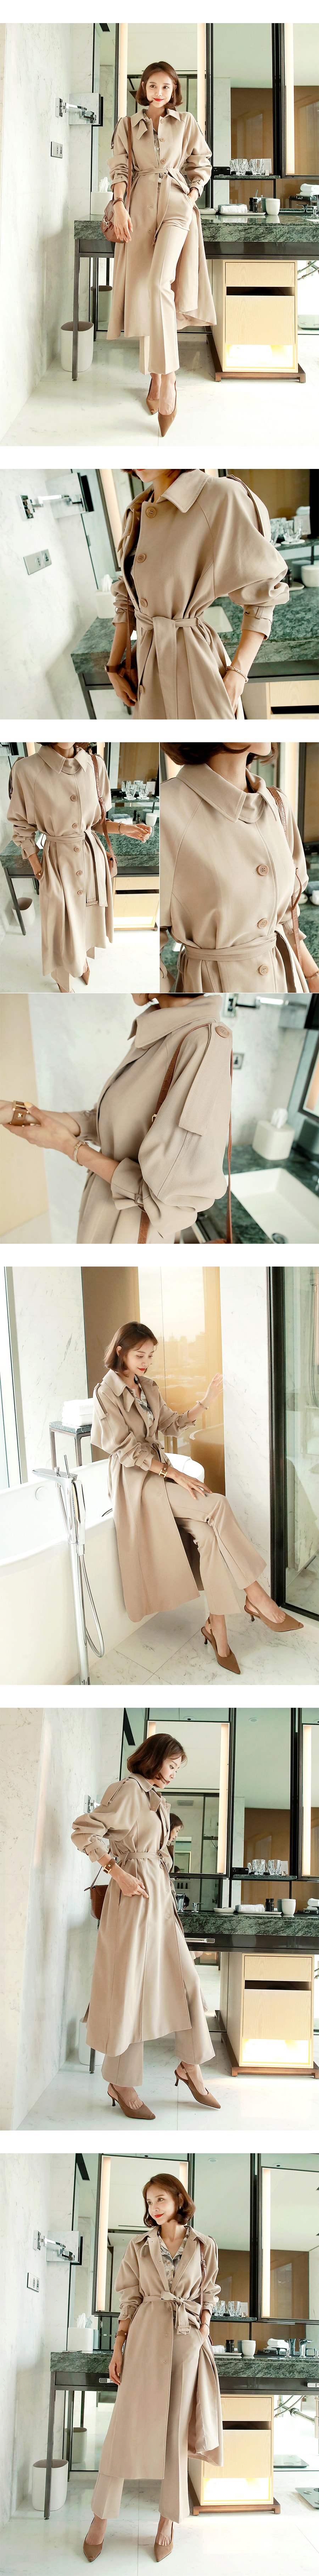 WINGS Maxi Trench Coat #Khaki One Size(S-M)